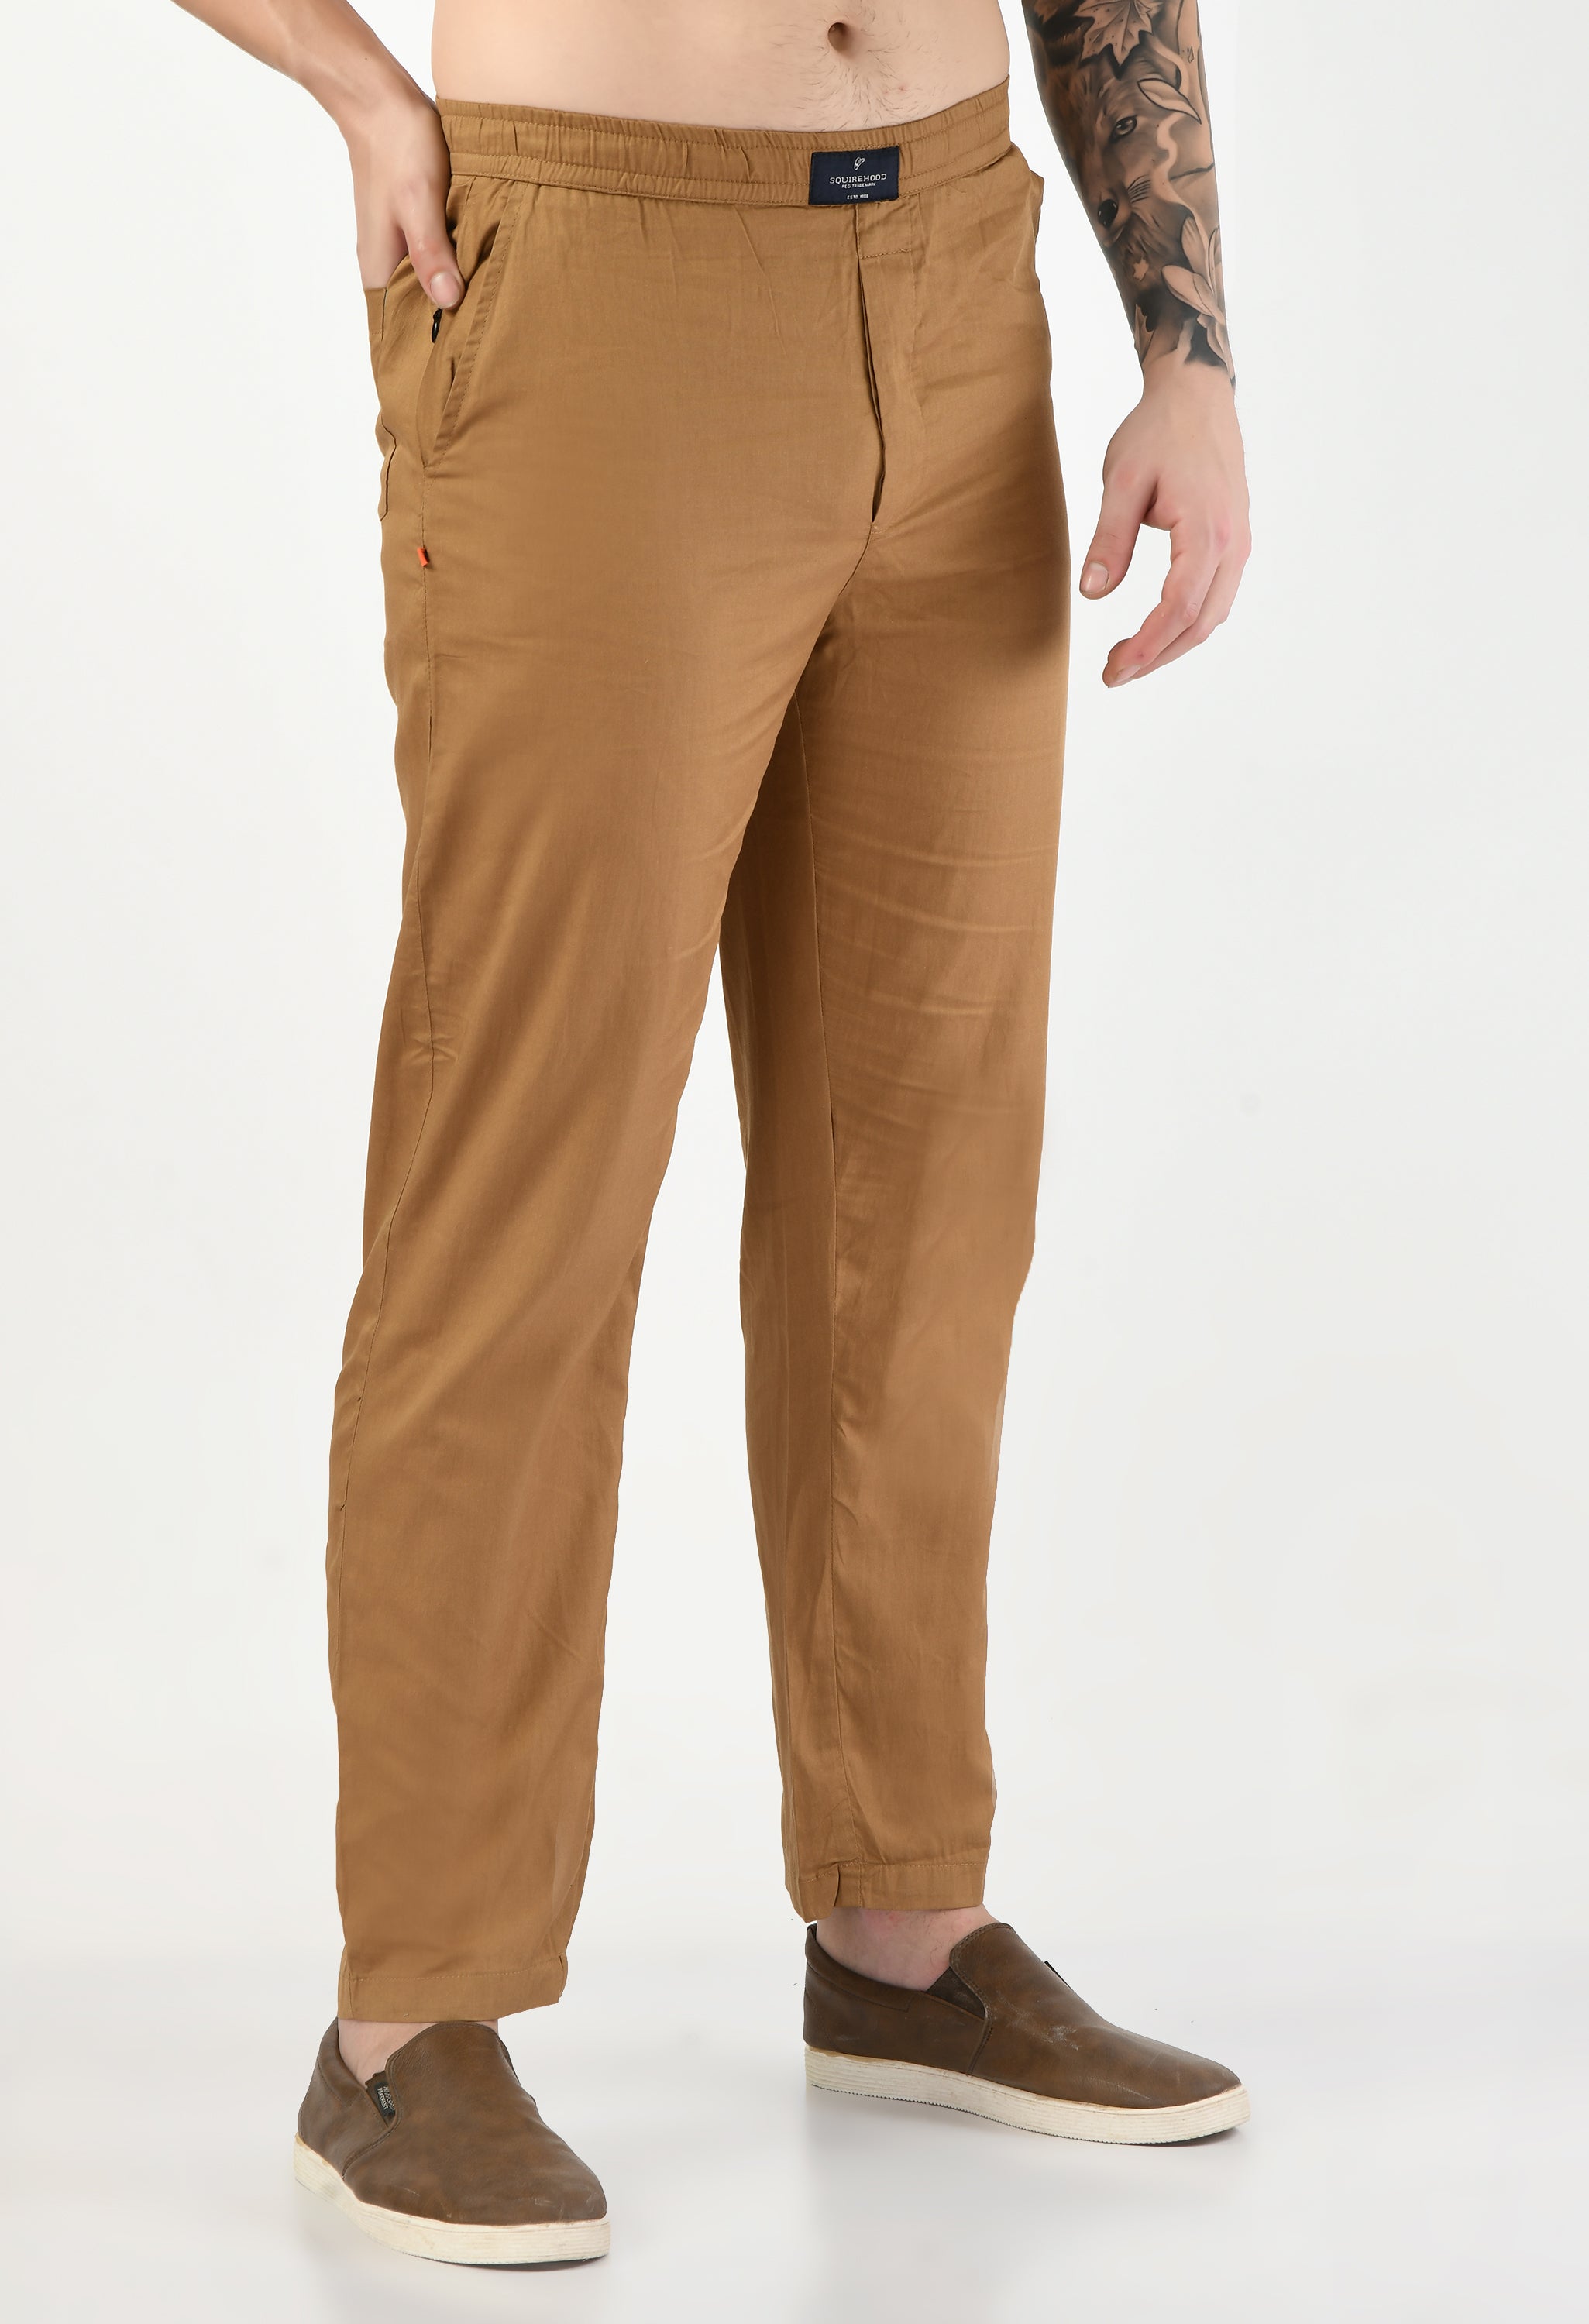 Beige Plain Relaxed Fit Casual Trouser